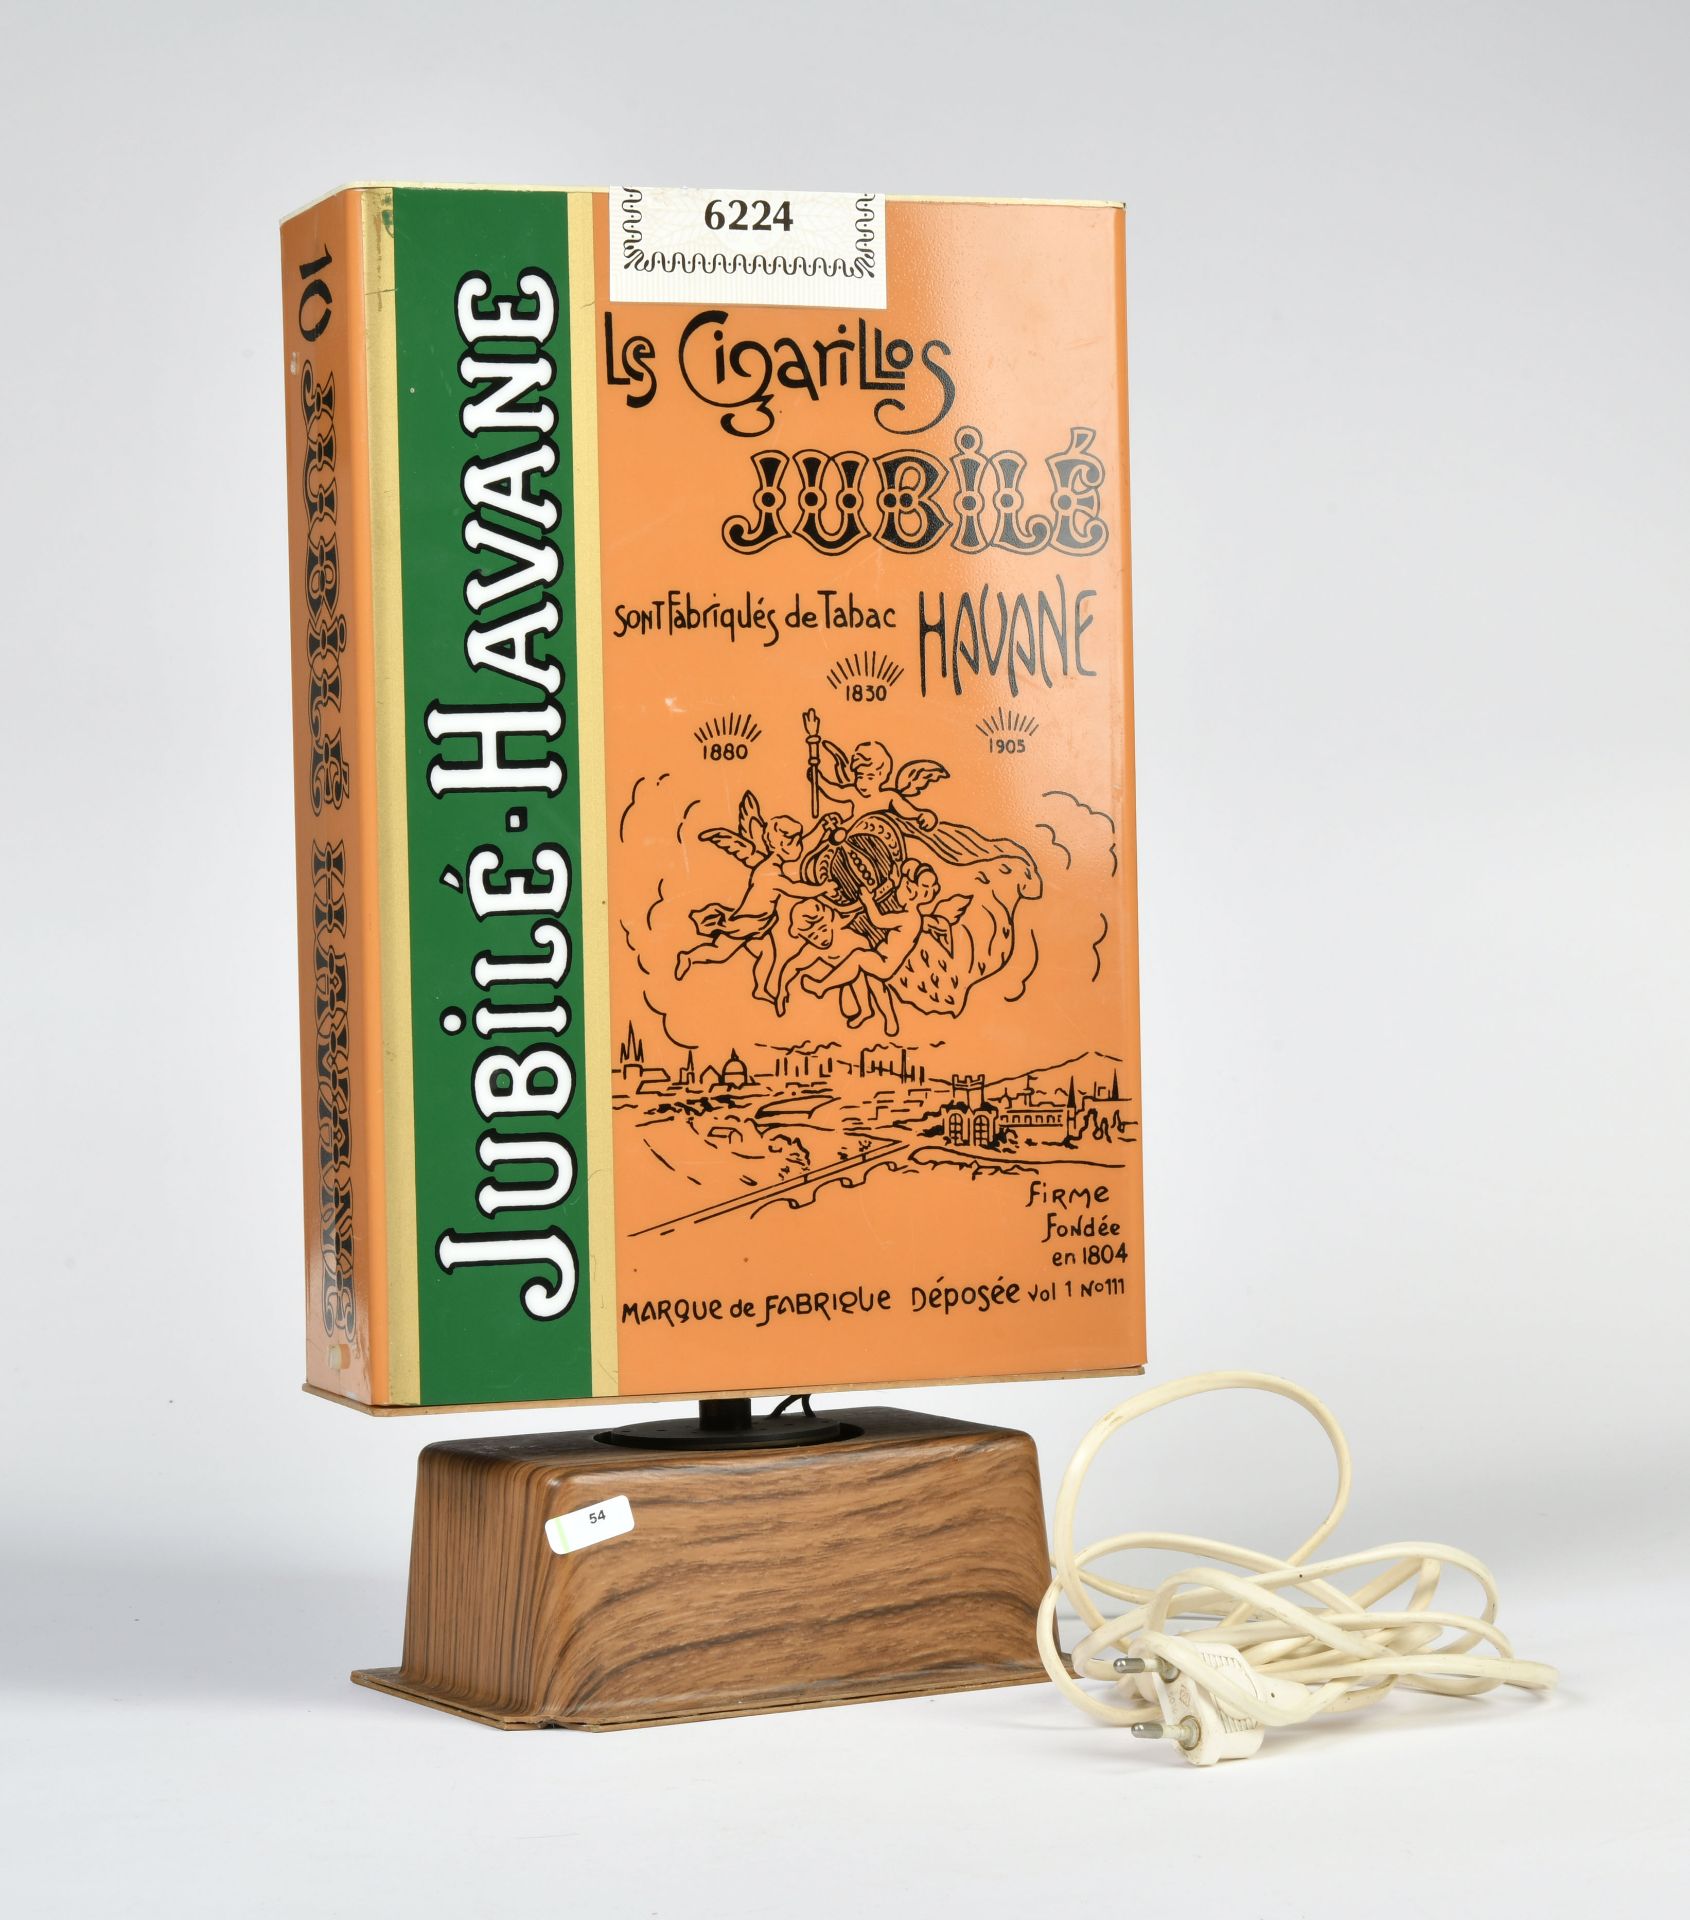 Jubile Havane, tobacco-display, 1970's, with illumination and drive, 1 edge of socle damaged,